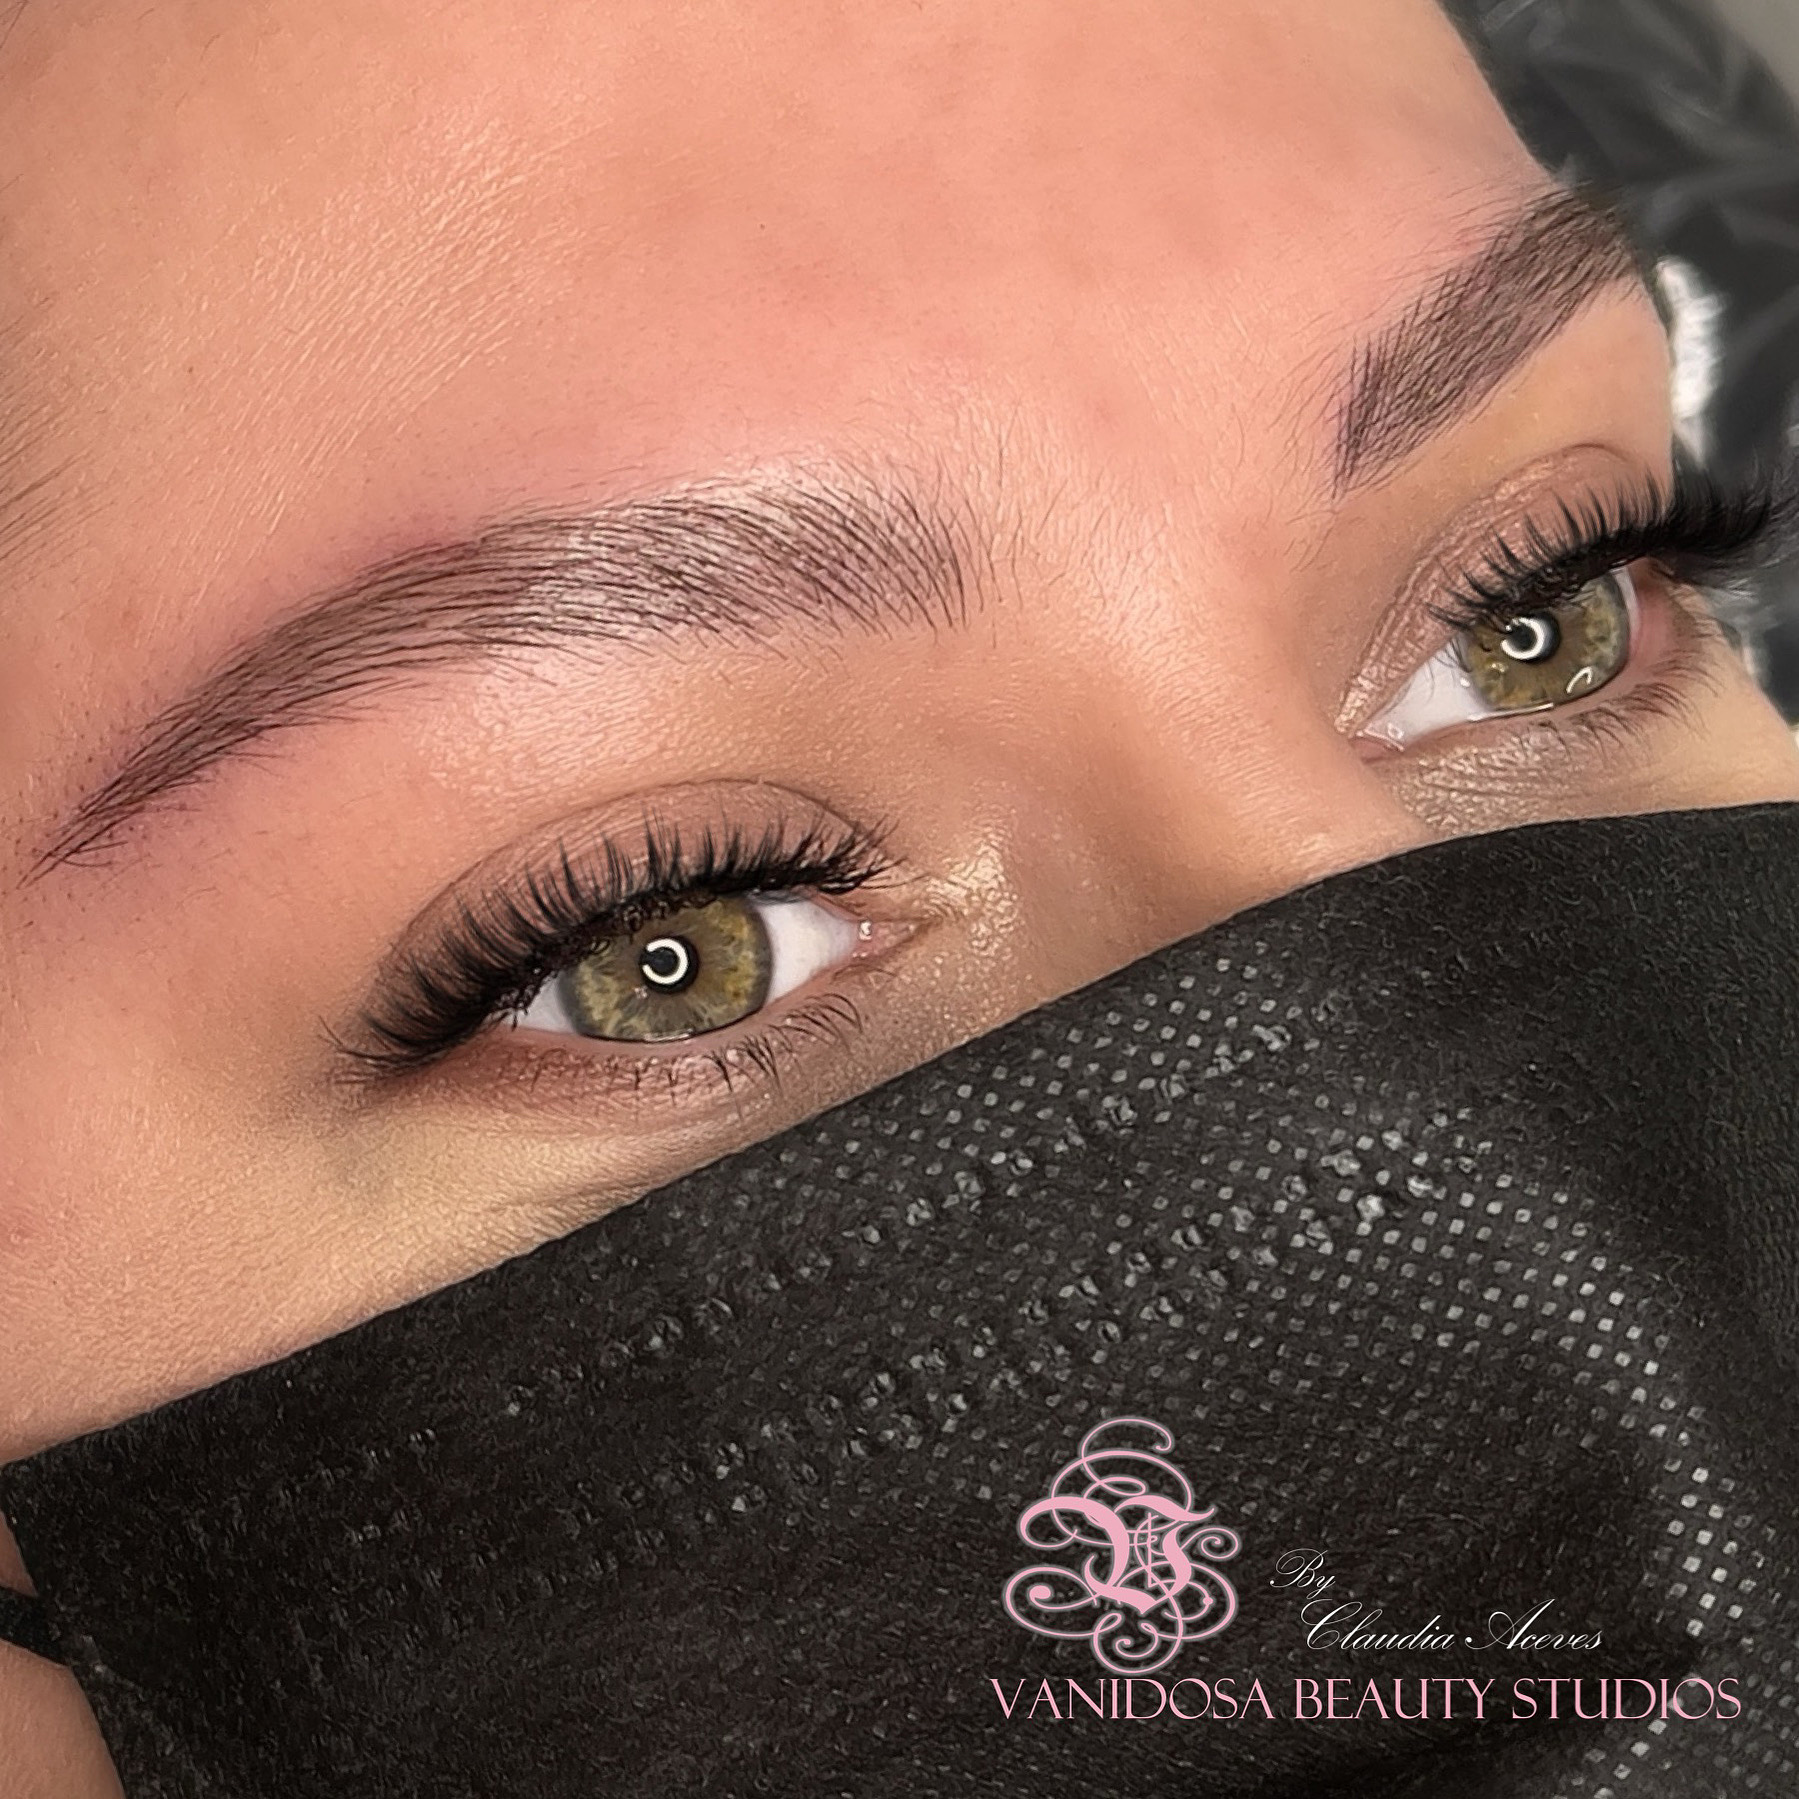 Set of Microblading brows done by Claudia Aceves at Vanidosa